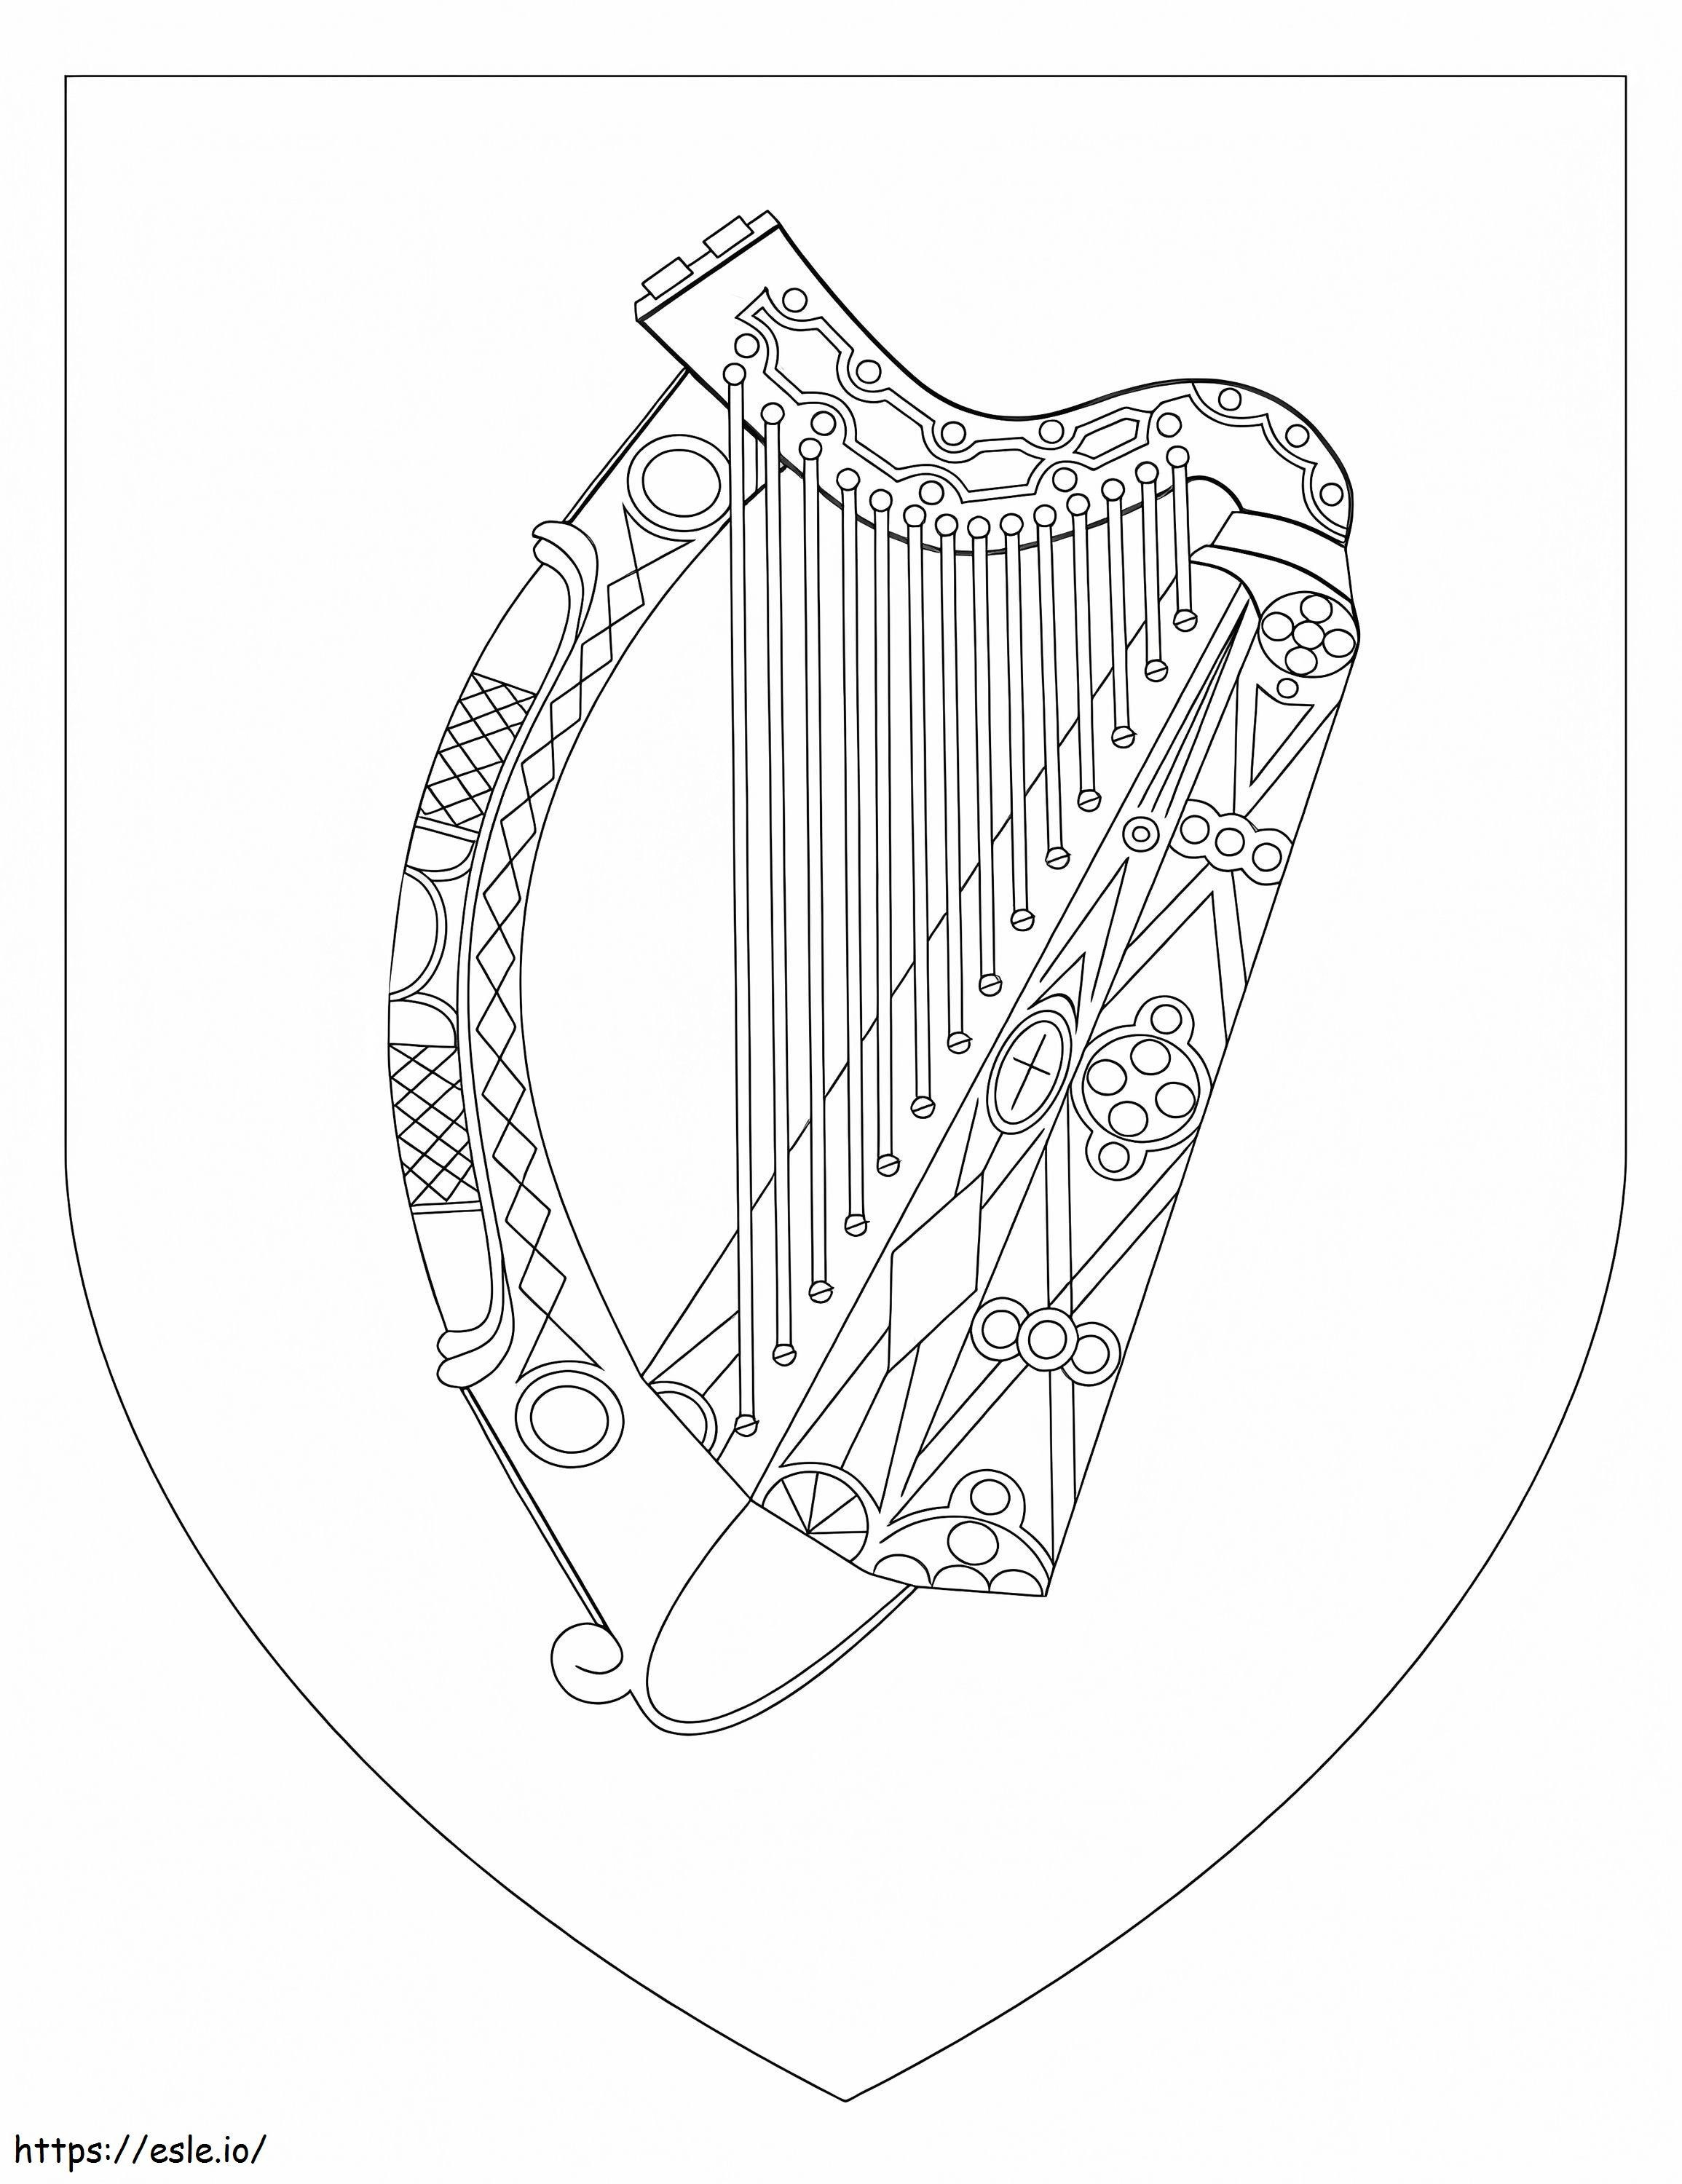 Coat Of Arms Of Ireland coloring page